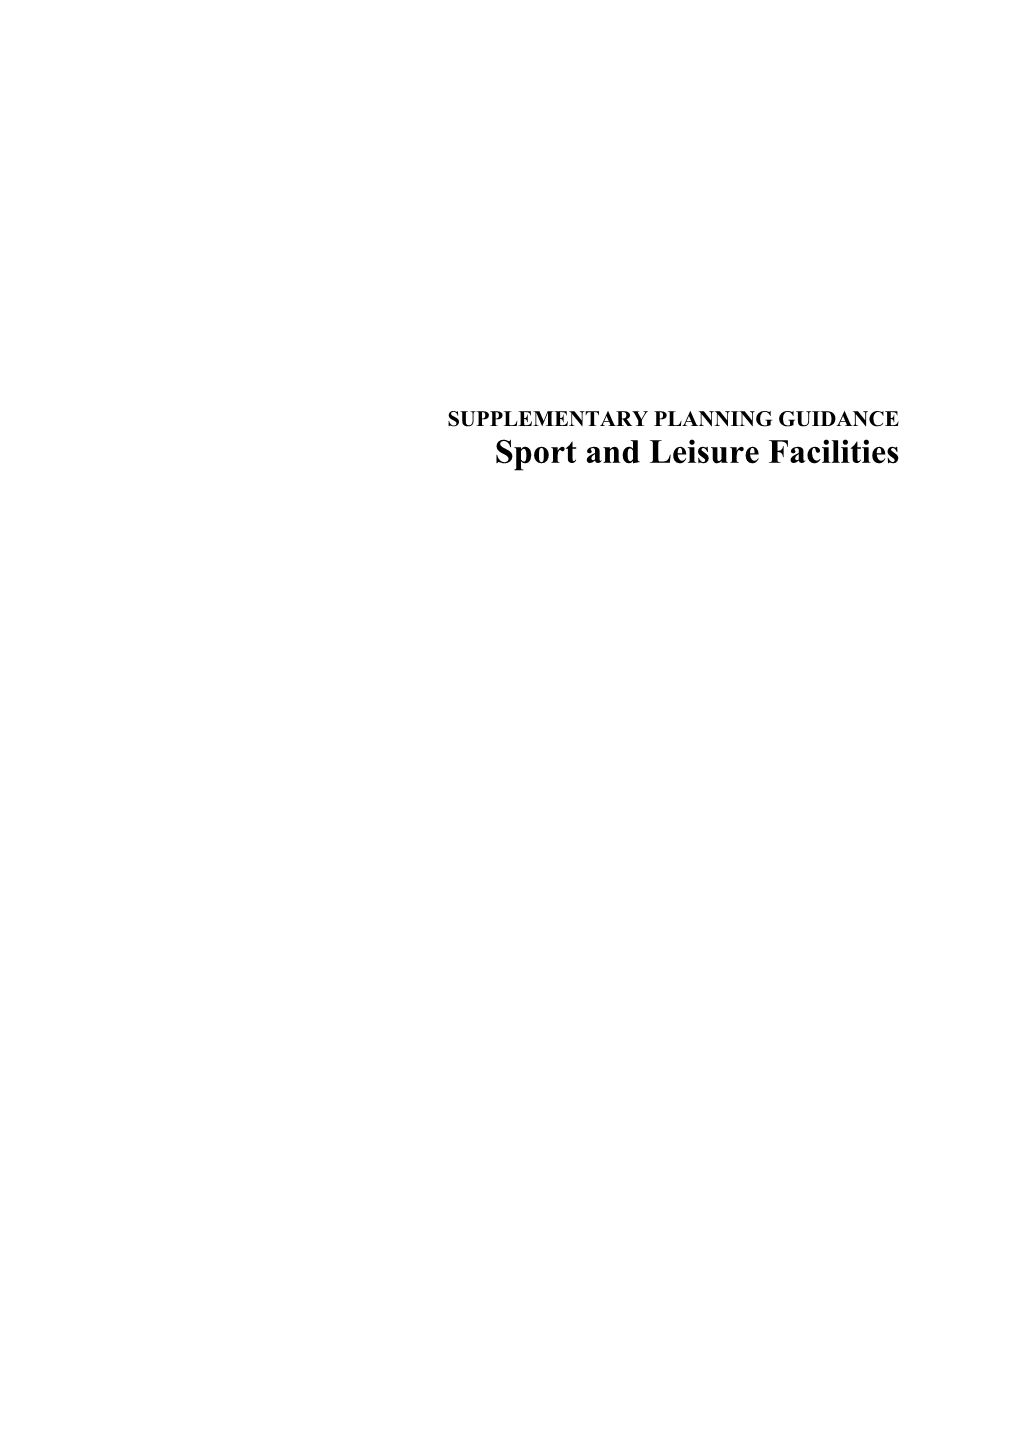 SUPPLEMENTARY PLANNING GUIDANCE Sport and Leisure Facilities Contents